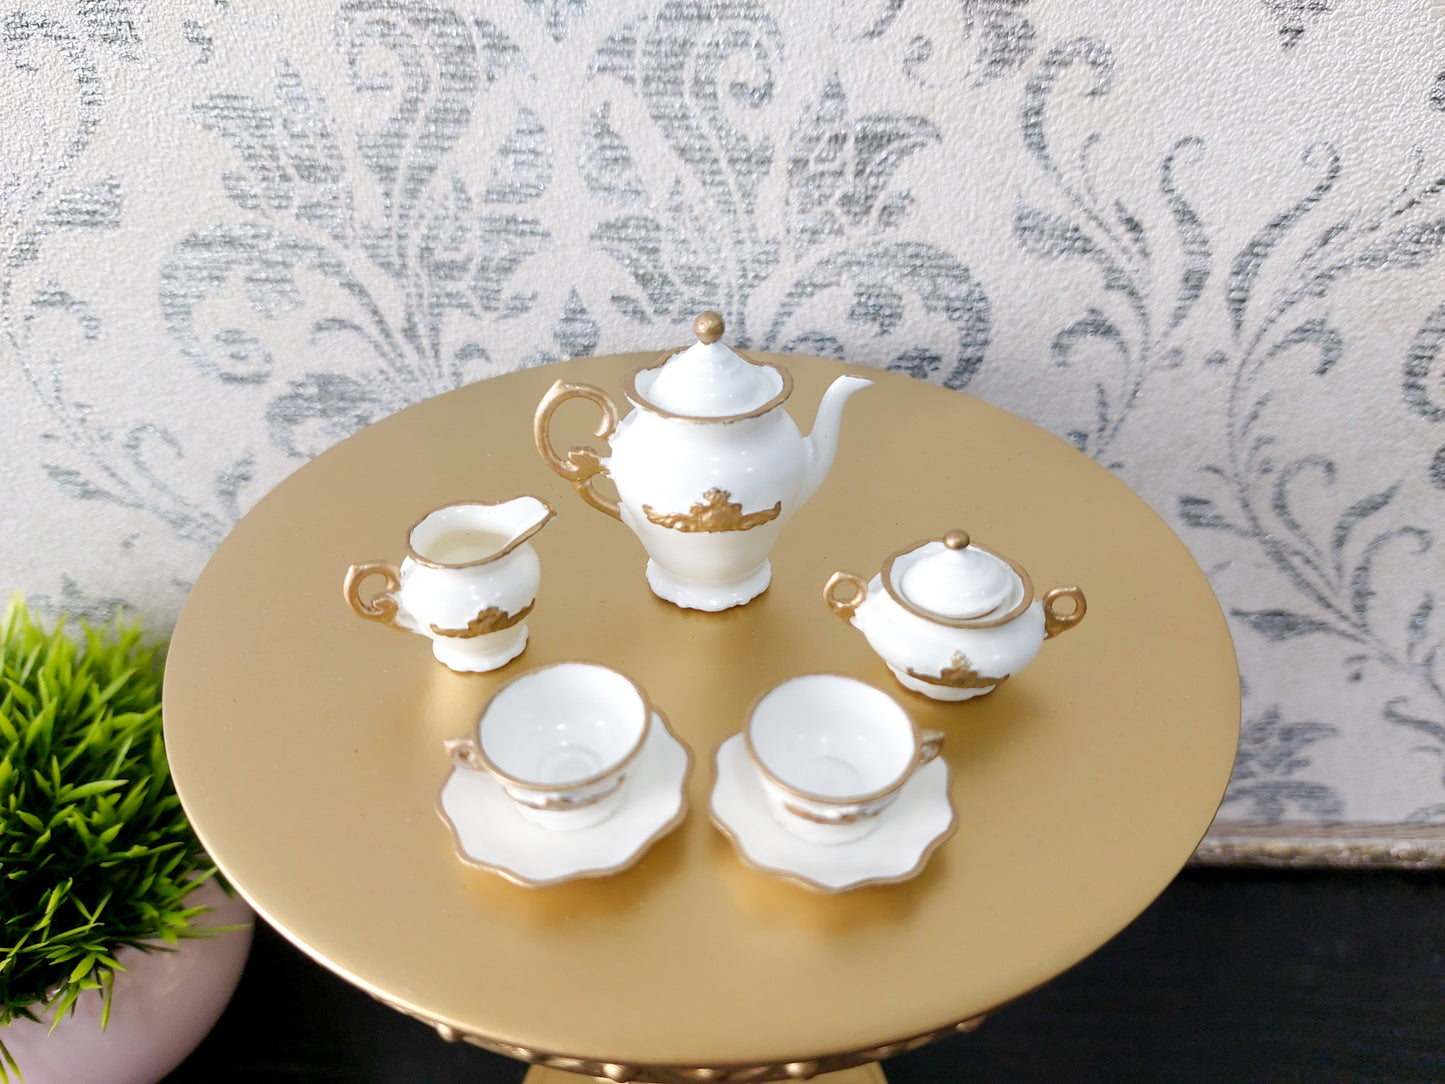 Doll tea set for two persons, white & gold